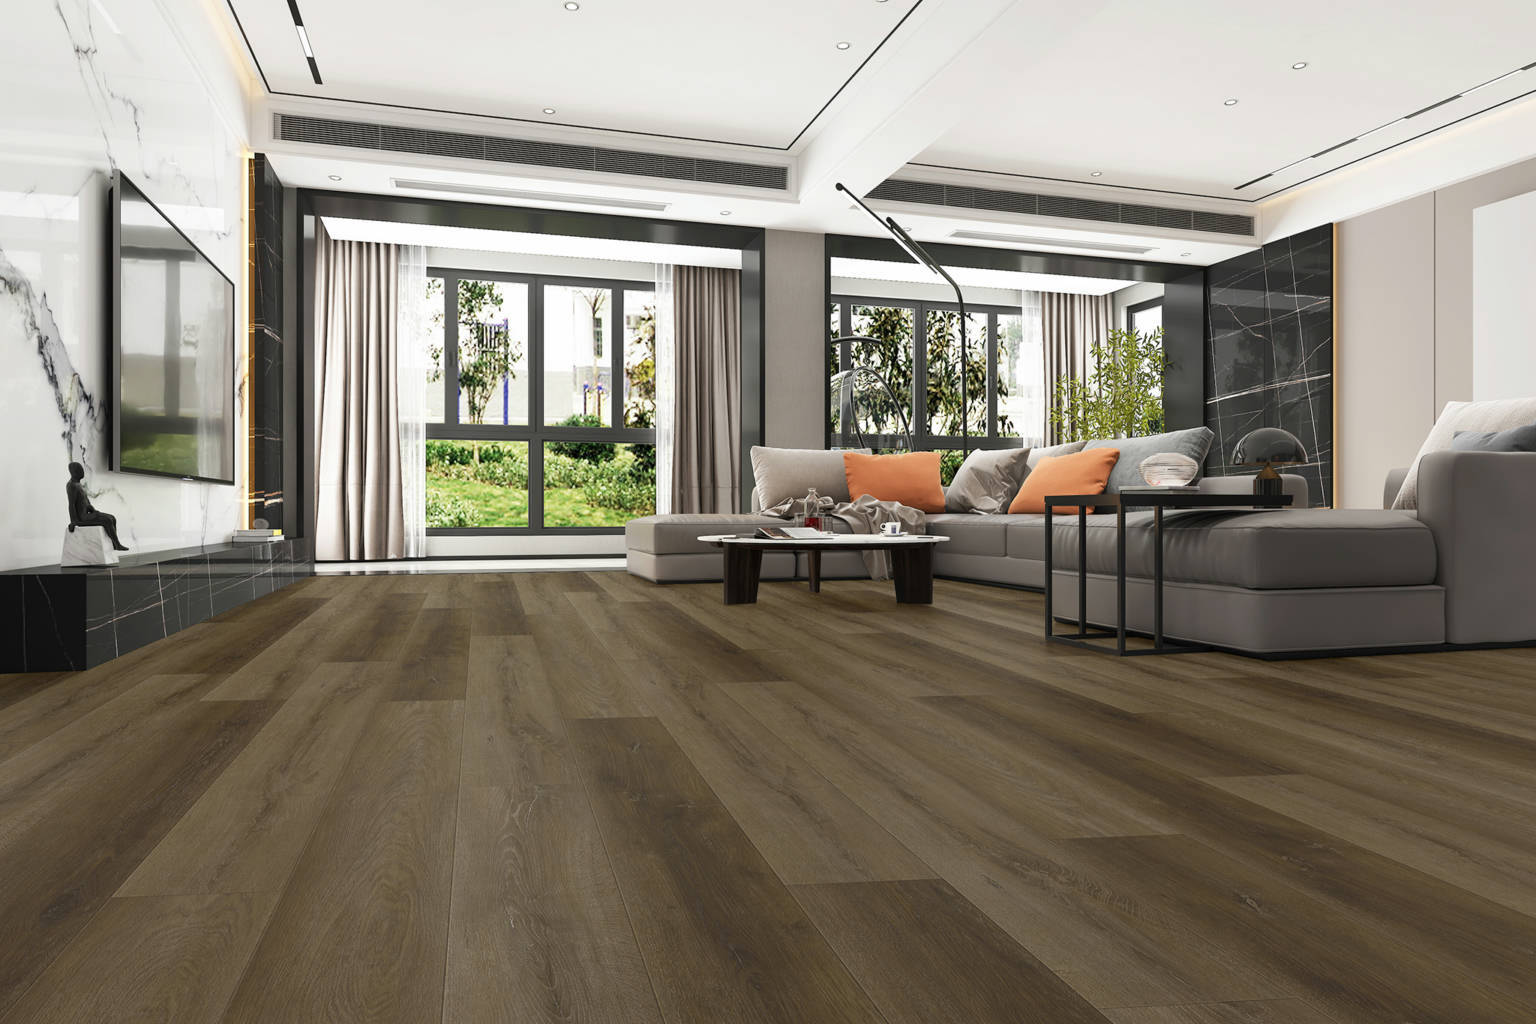 Timber Ridge Gold 20 1 | Qualis Ceramica | Luxury Tile and Vinyl at affordable prices